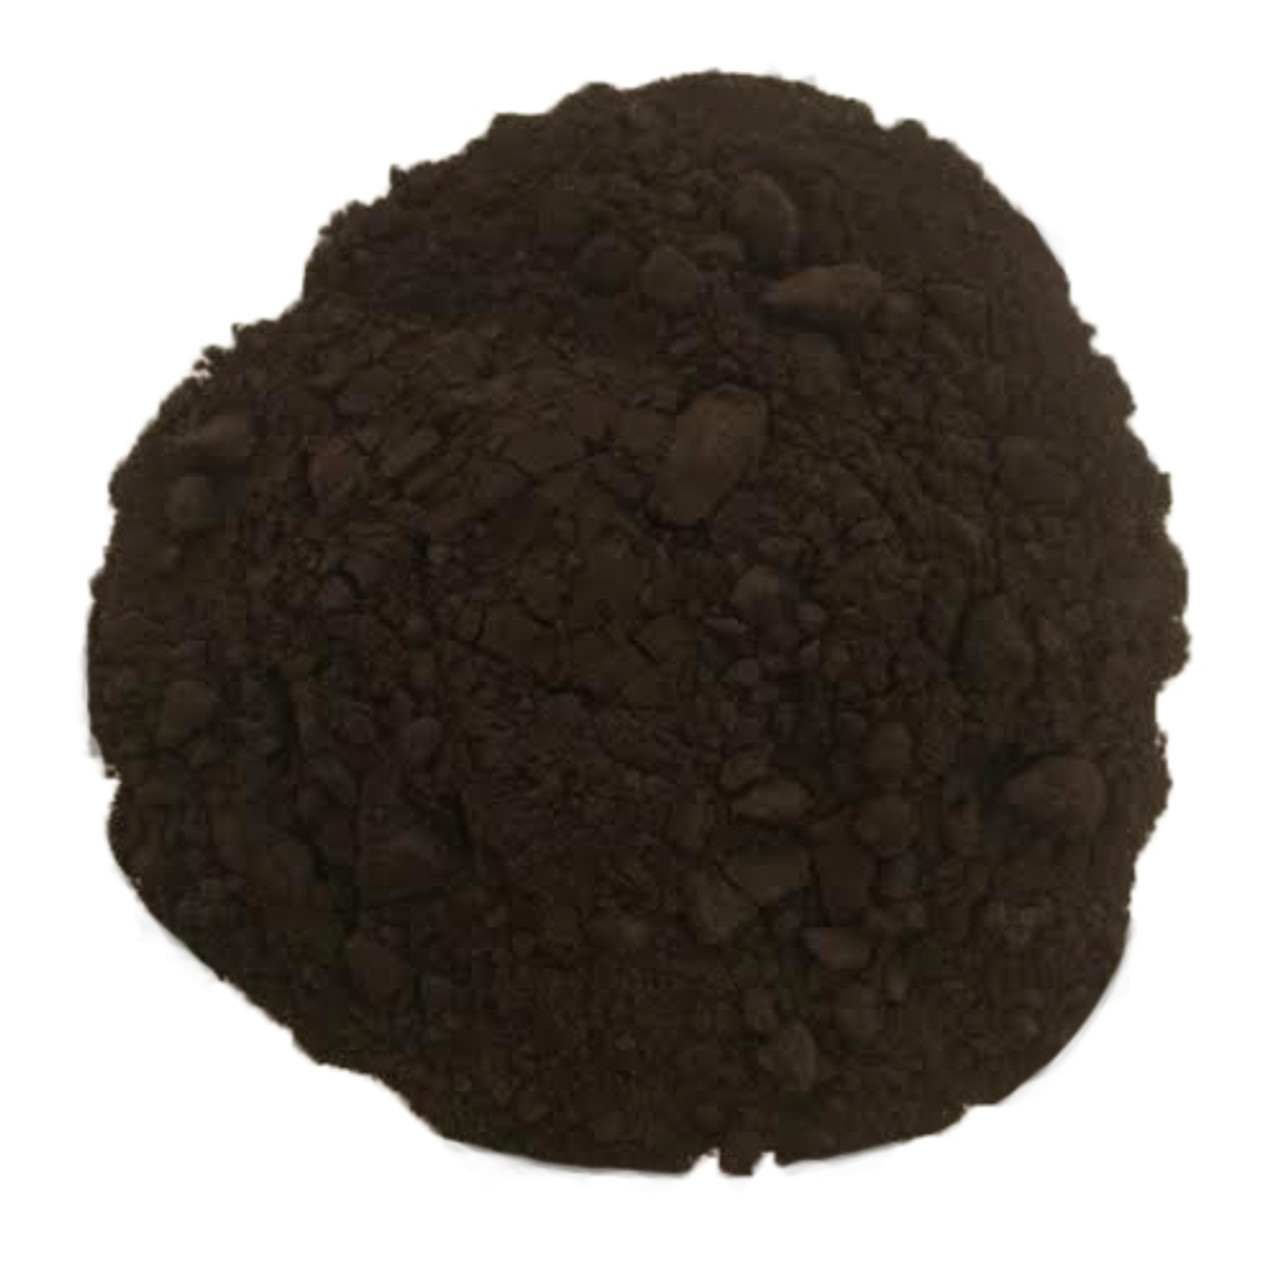  Eat Well Black Cocoa Powder 16 oz, Dutch-Processed Dark Cocoa  Powder For Making Chocolate and Baking, Unsweetened Alkalized Dark Cocoa  Powder in Reseable Bag, From 100% Natural Raw Cacao 